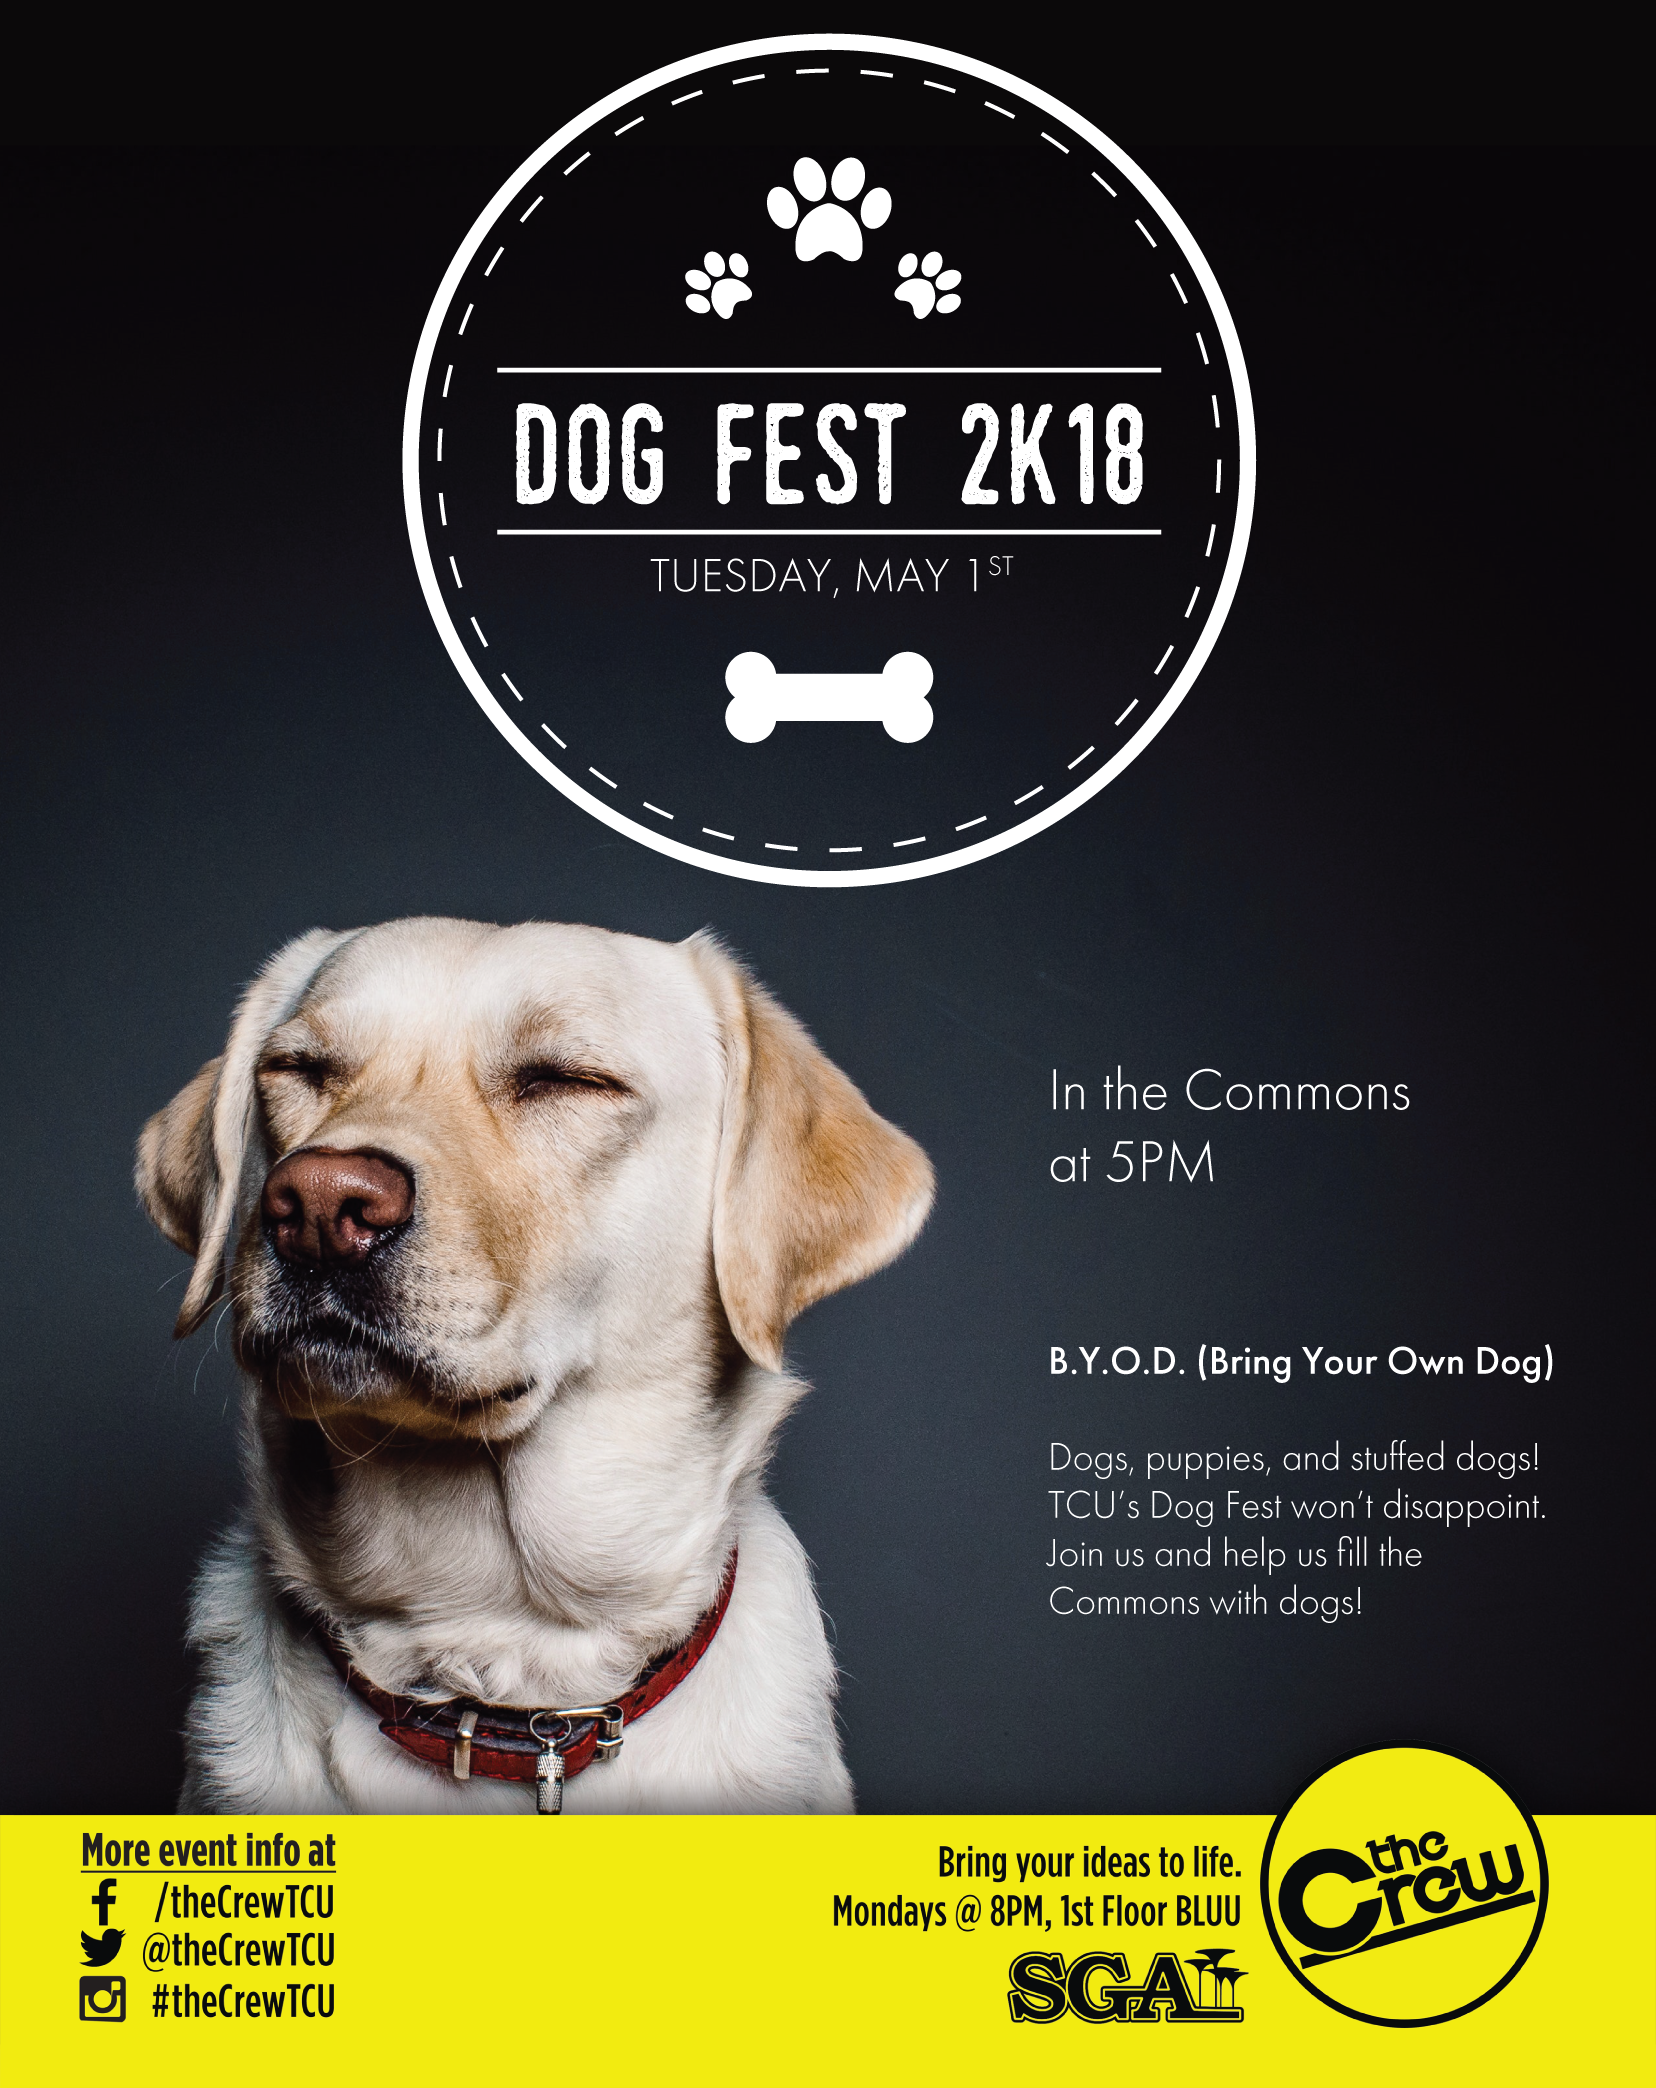 18_05_01_DogFest2k18_Poster